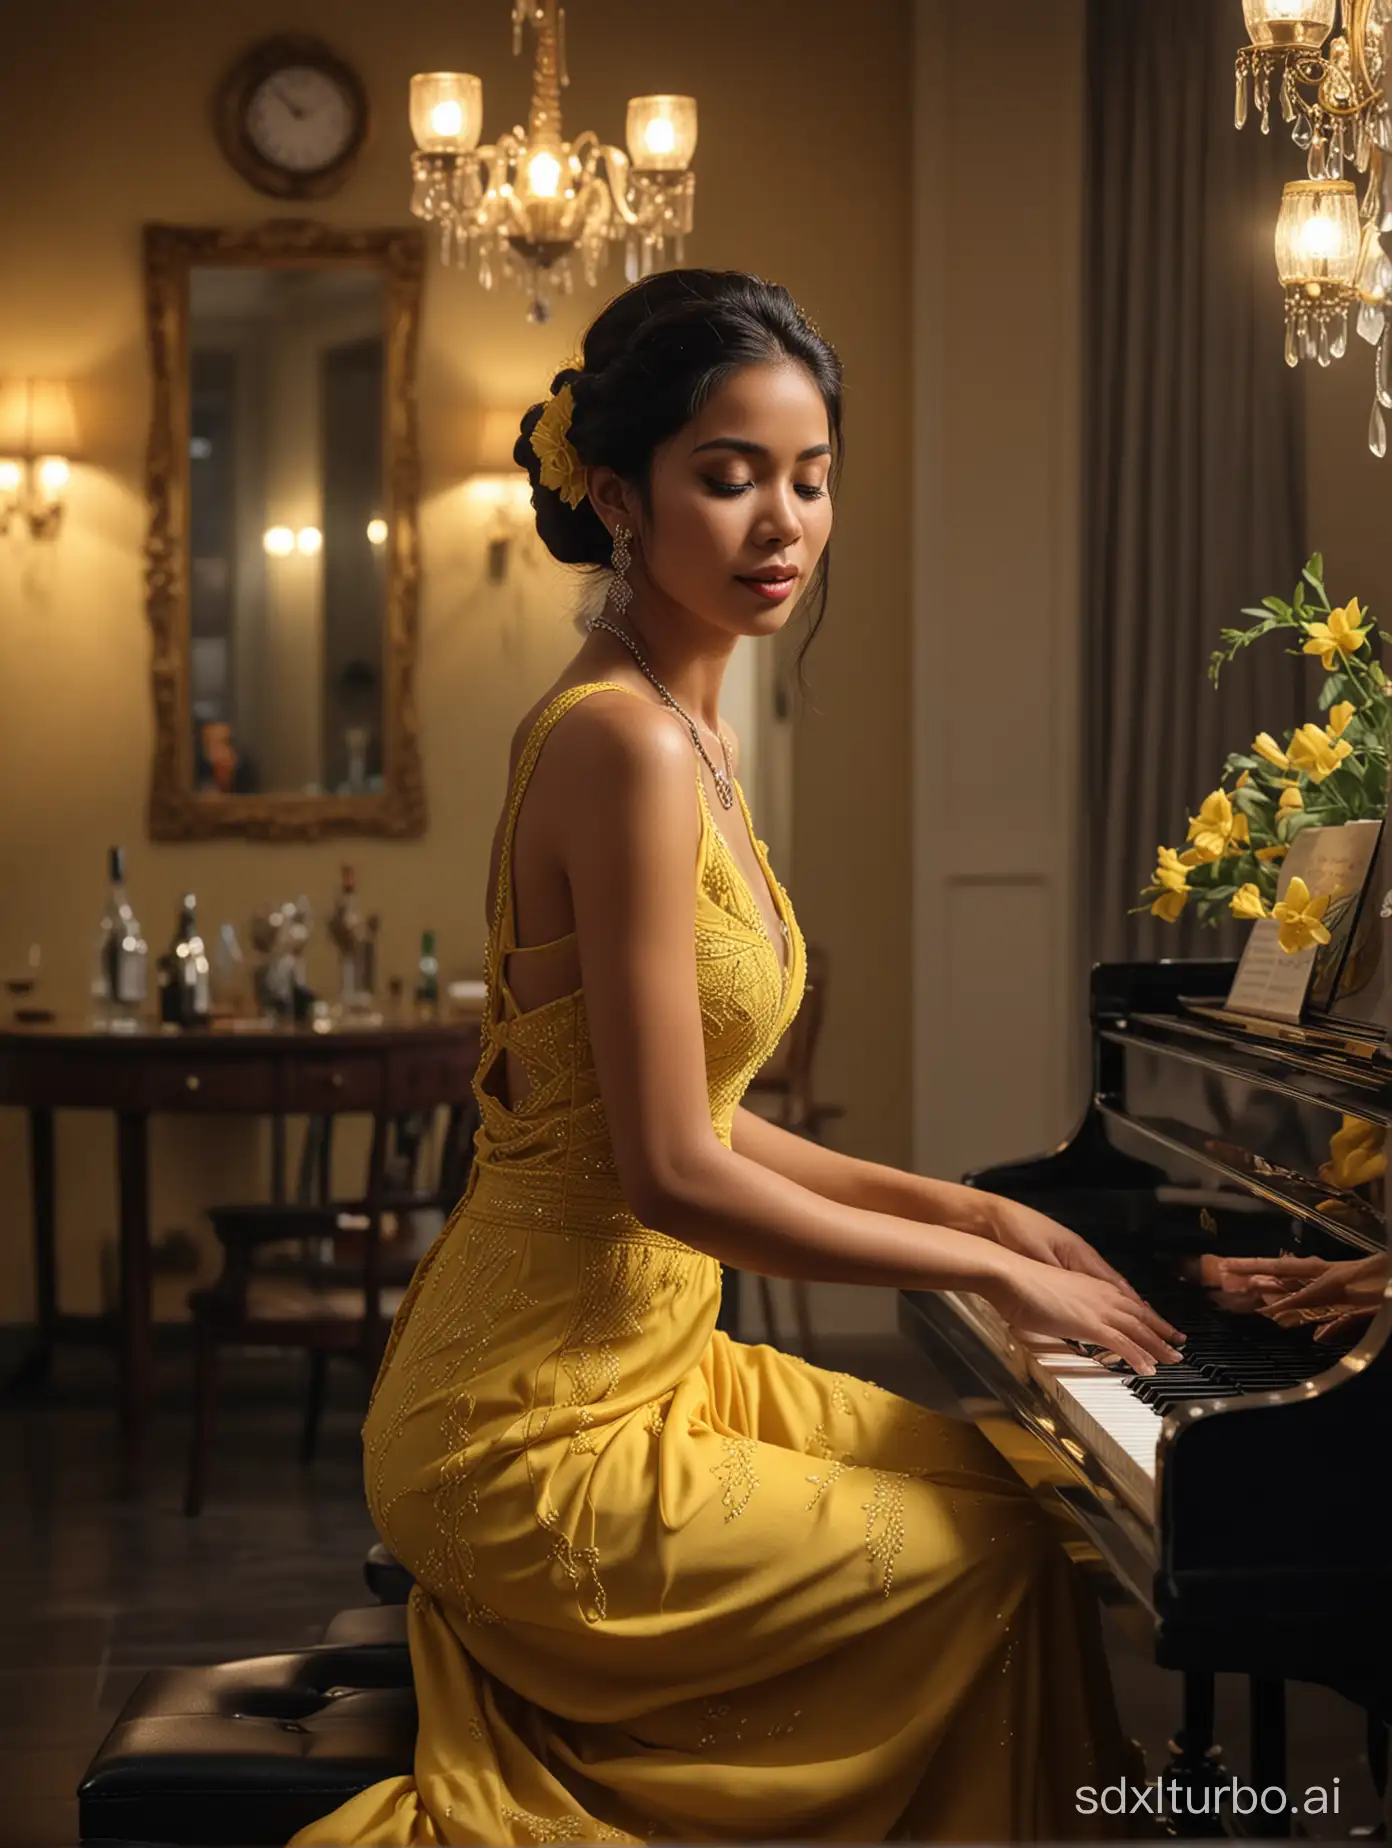 Imagine a 4K oil painting featuring an Indonesian woman in a flowing yellow dress, gracefully playing a jazz piano in a dimly lit room. Black hair was styled in an intricate braid, accentuated with dangling earrings and a sparkling necklace. With closed eyes and a soulful expression, he pours his heart into the music, captivating the audience with his talent and passion. dimly lit luxury outdoor cafe background.